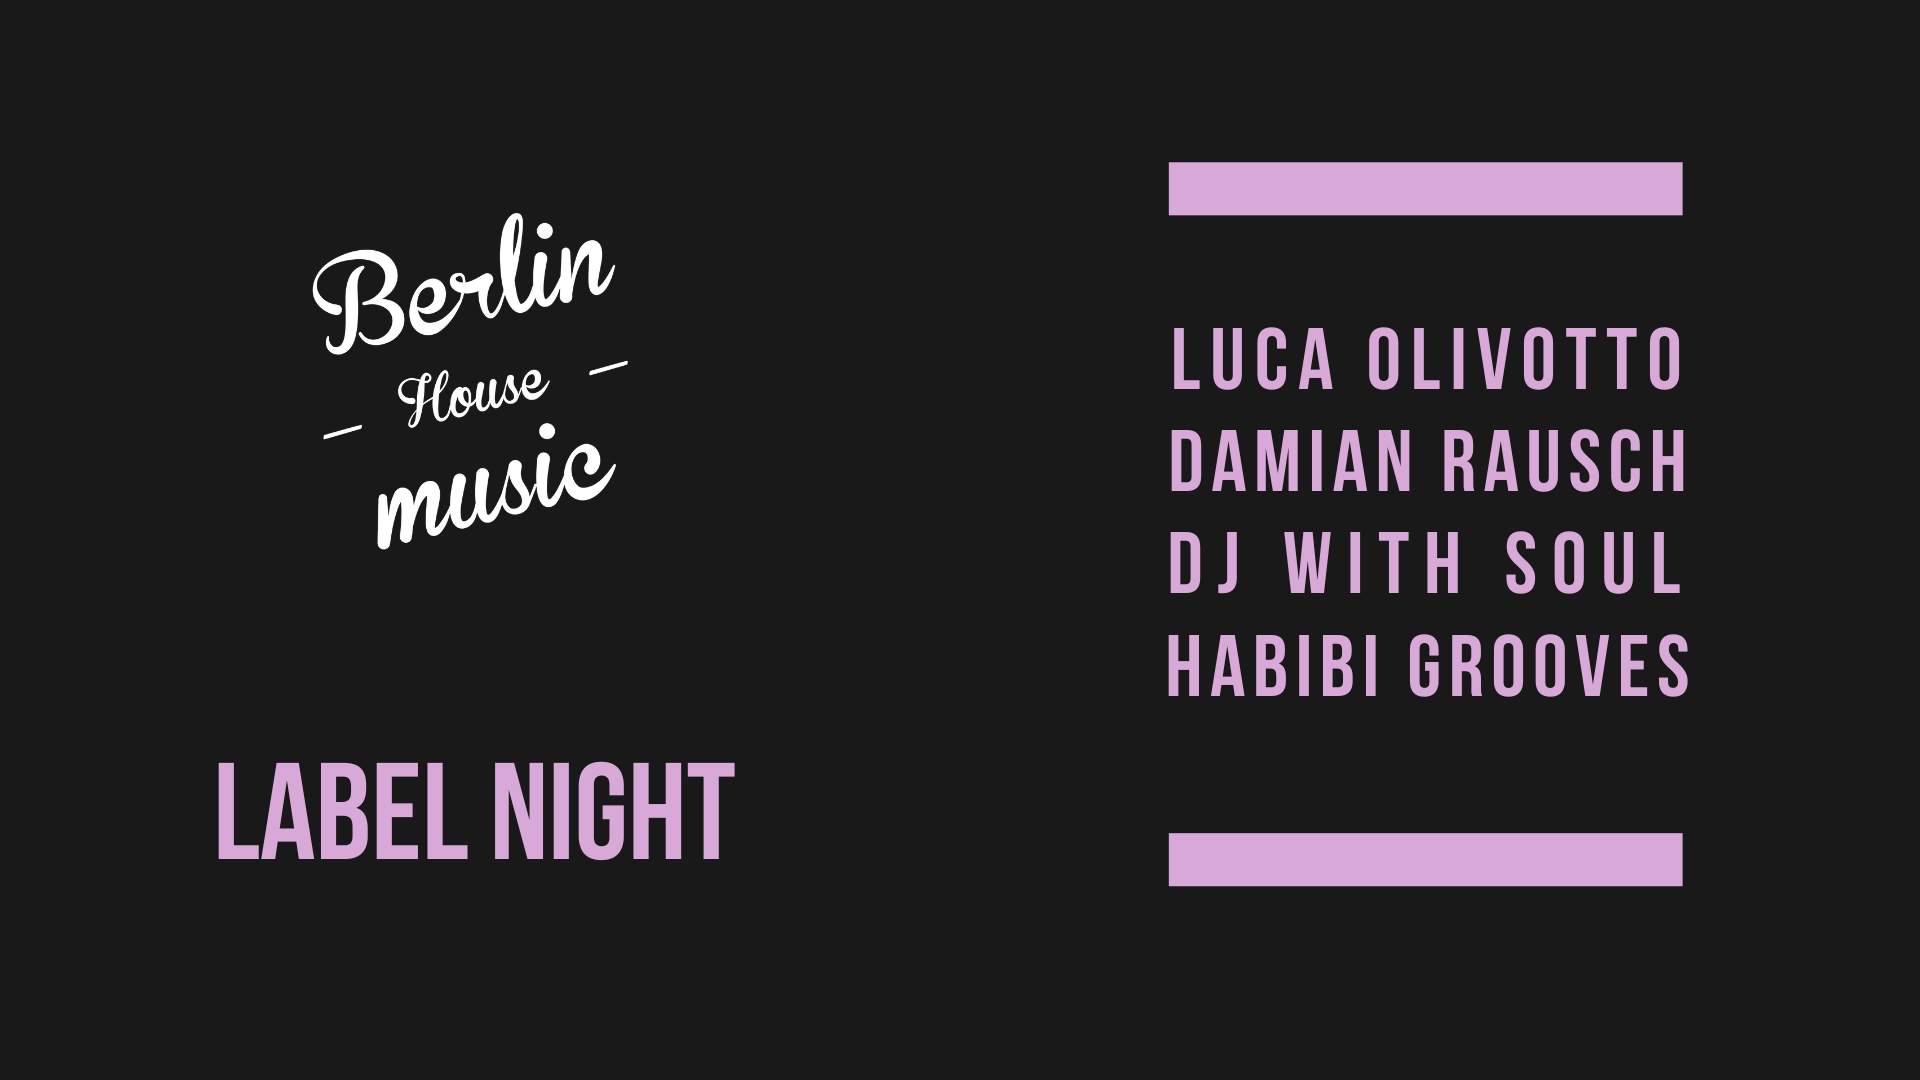 Berlin House Music Label Night: Luca Olivotto, Damian Rausch, DJ with Soul, Habibi Grooves - フライヤー表